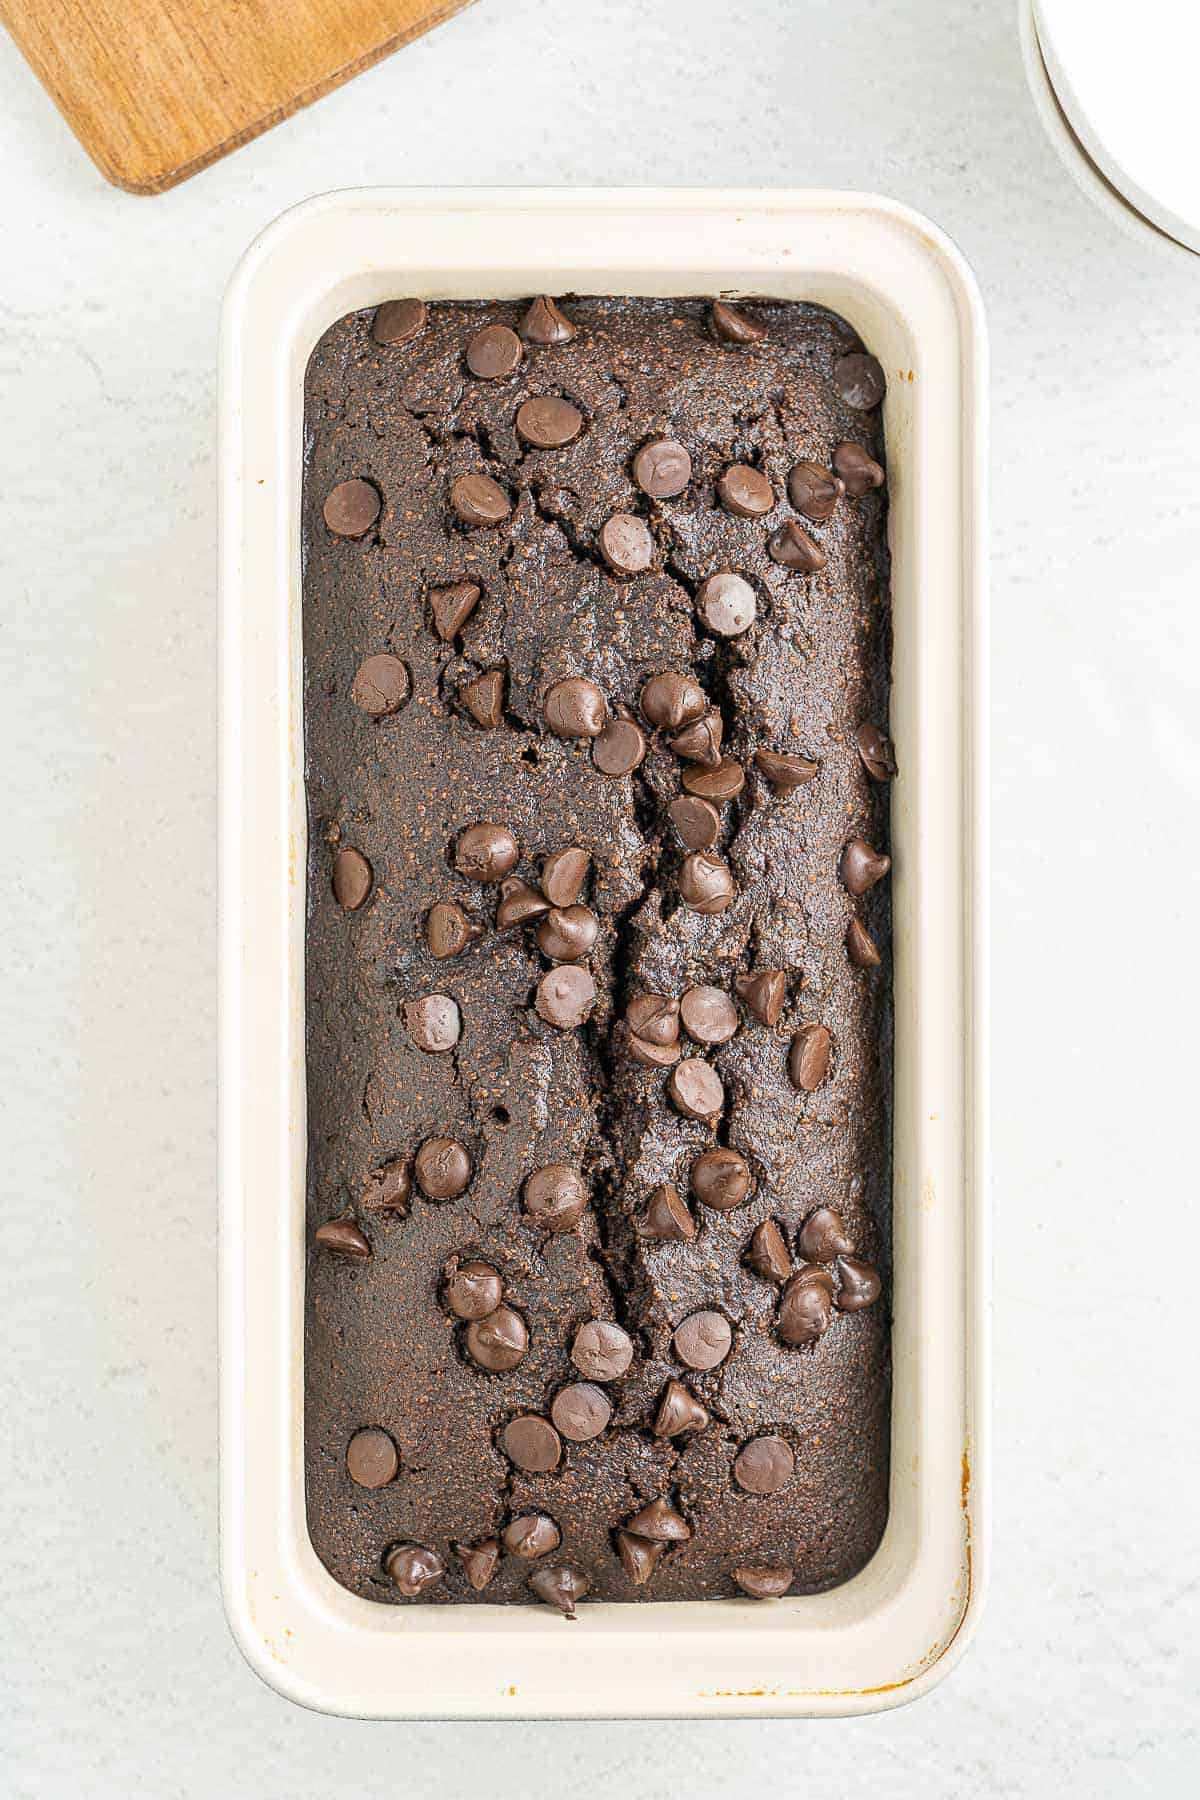 A fresh loaf of low carb and gluten free chocolate zucchini bread sliced on a wooden cutting board.